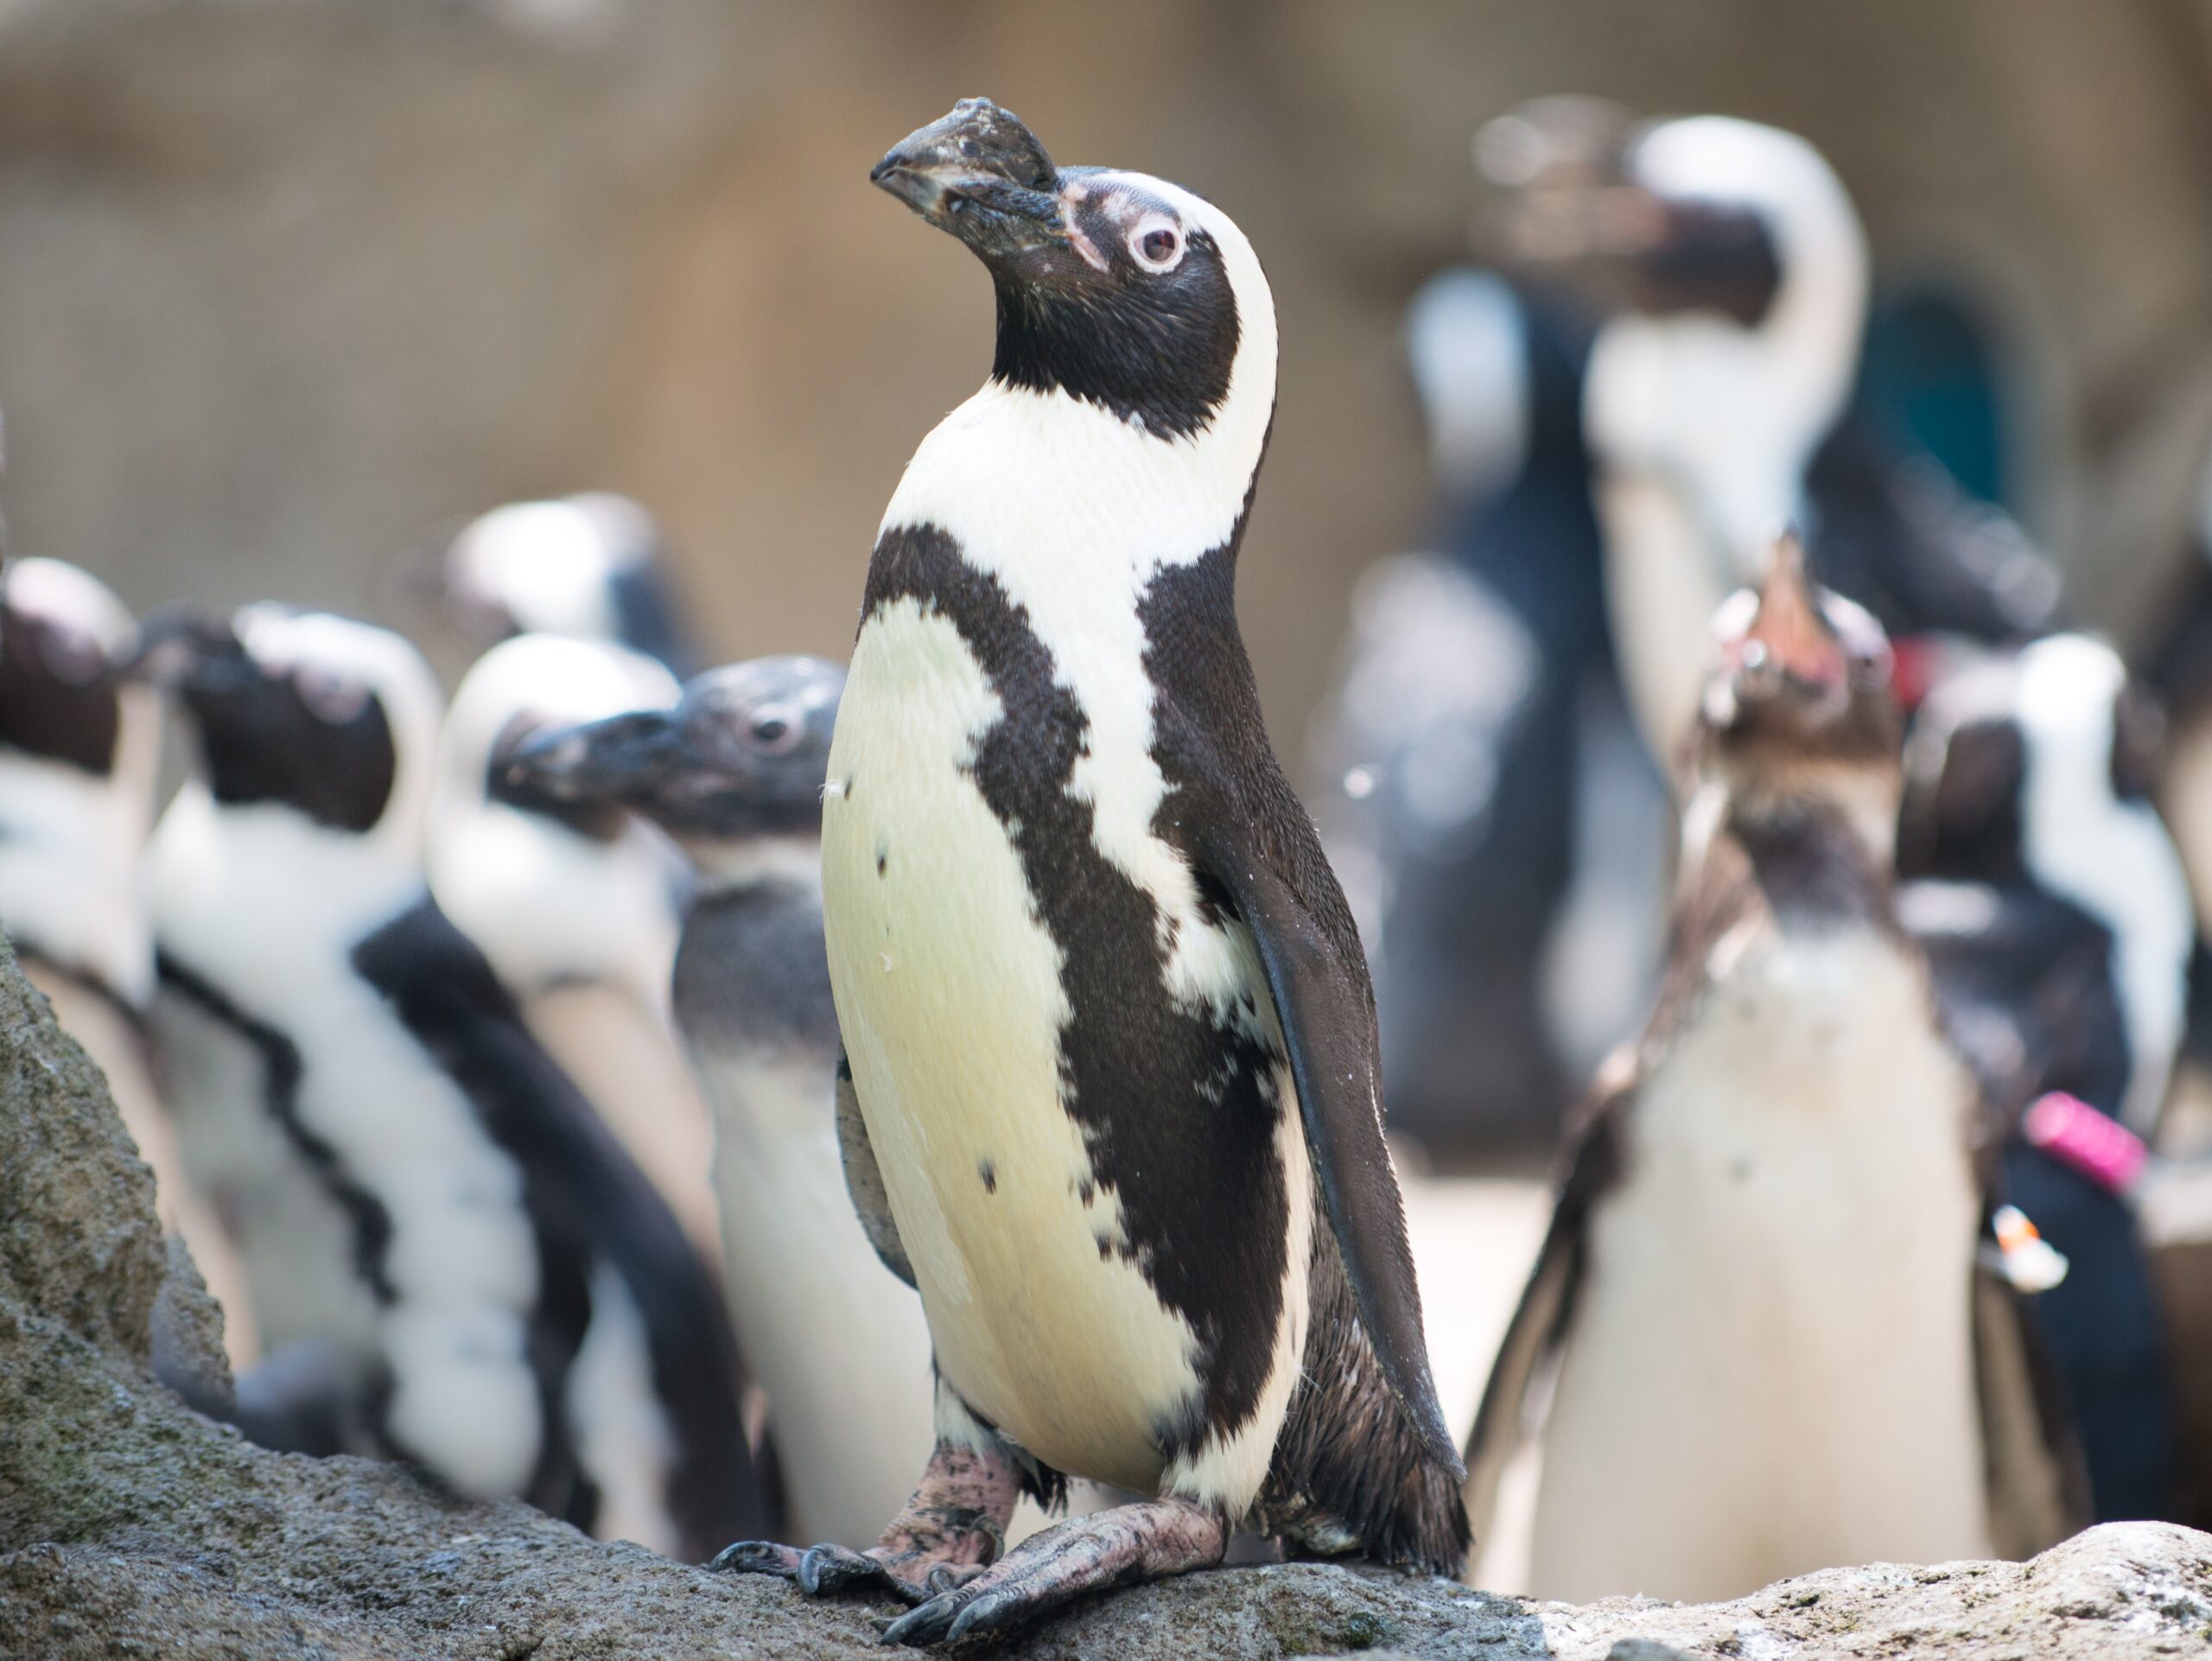 More about our penguin colony